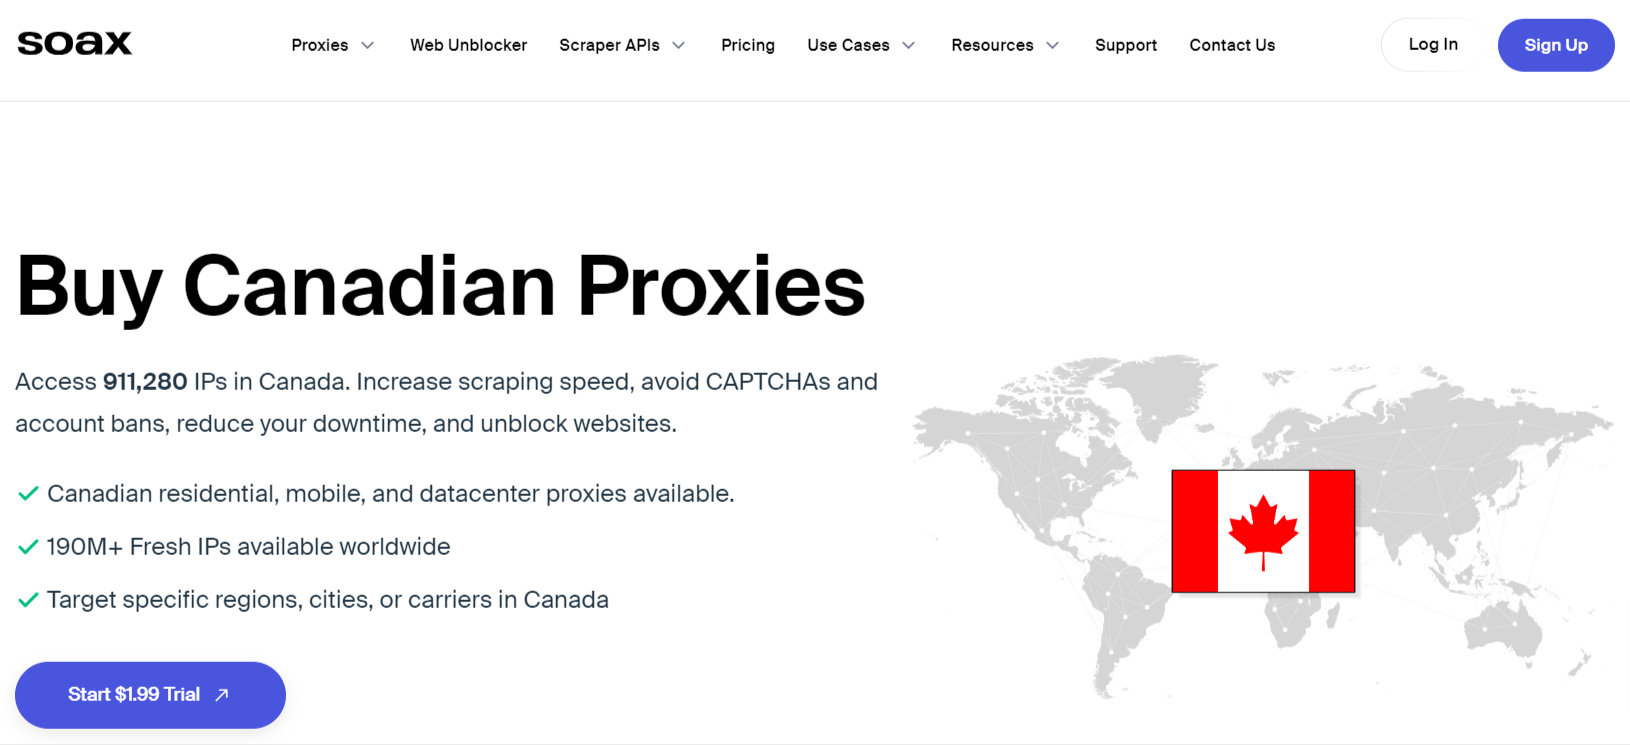 Buy-Canadian-Proxies - SOAX